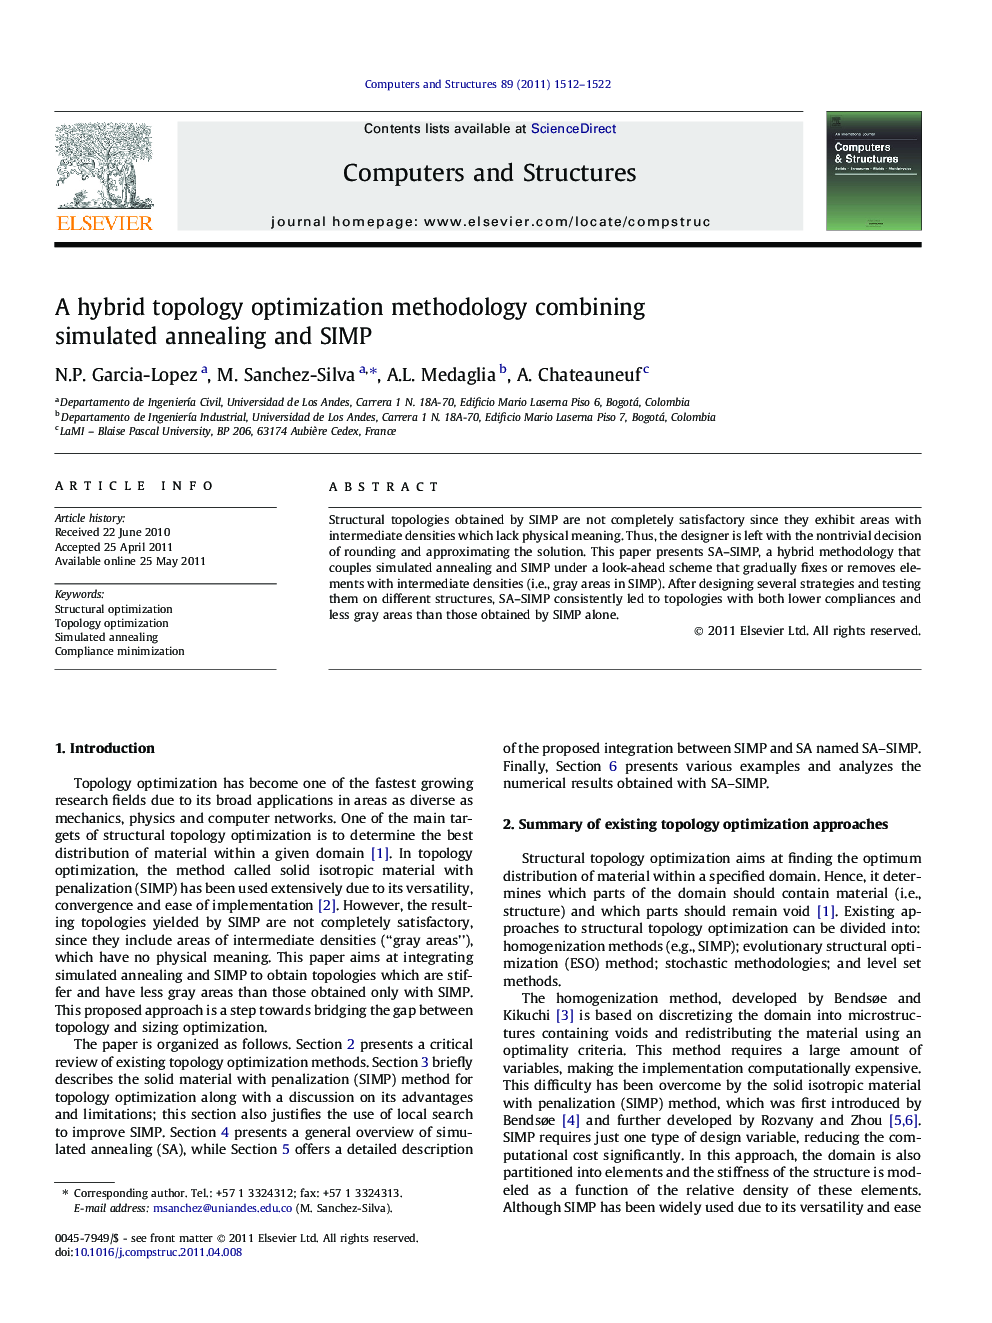 A hybrid topology optimization methodology combining simulated annealing and SIMP